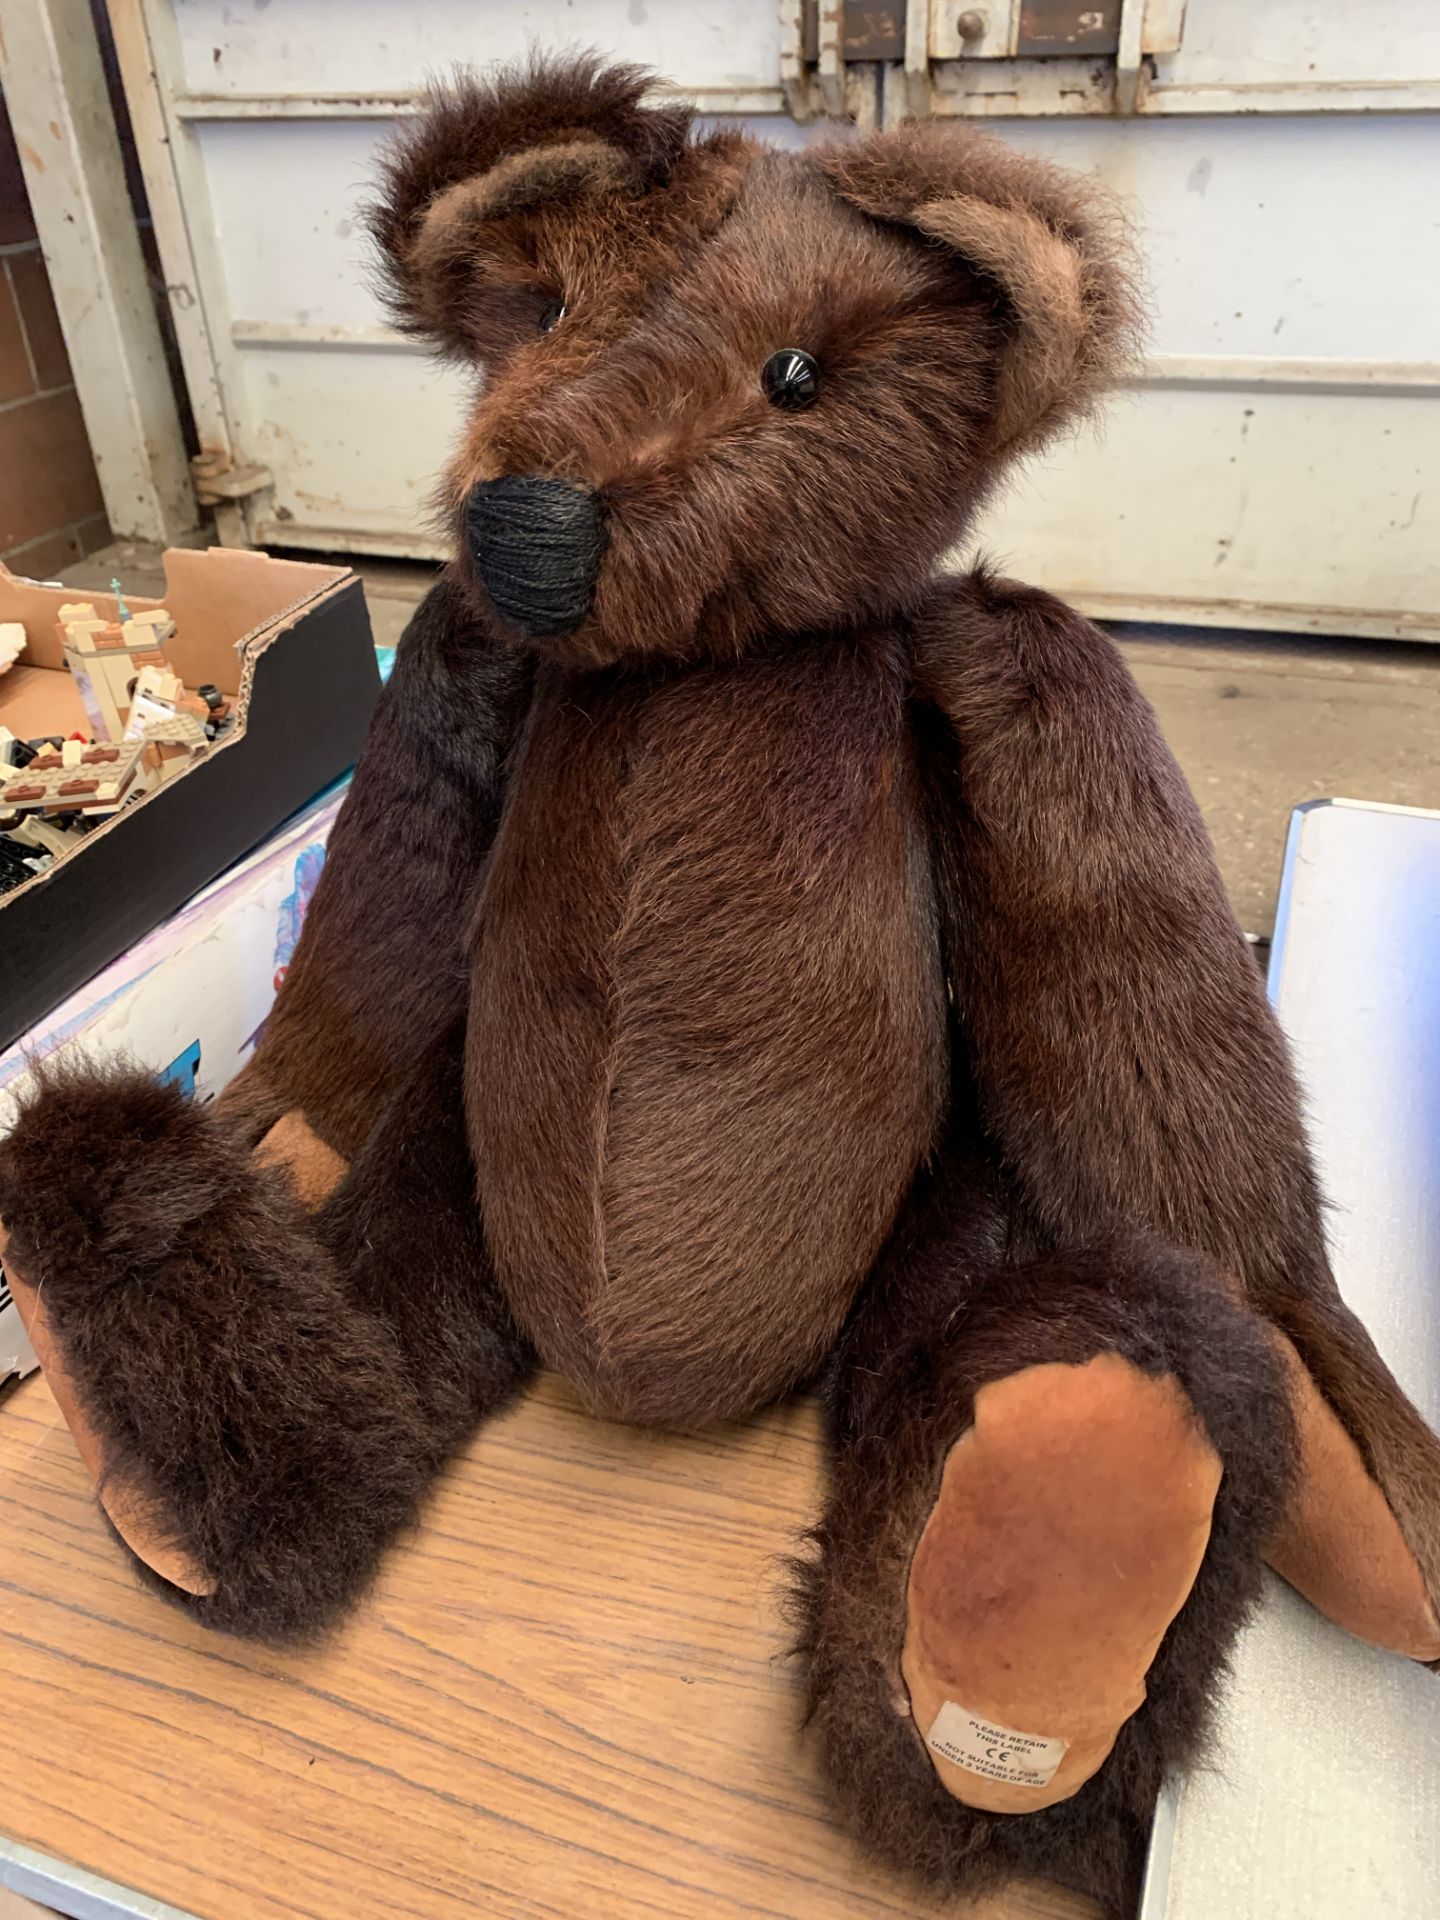 A large brown jointed teddy bear - Image 2 of 2